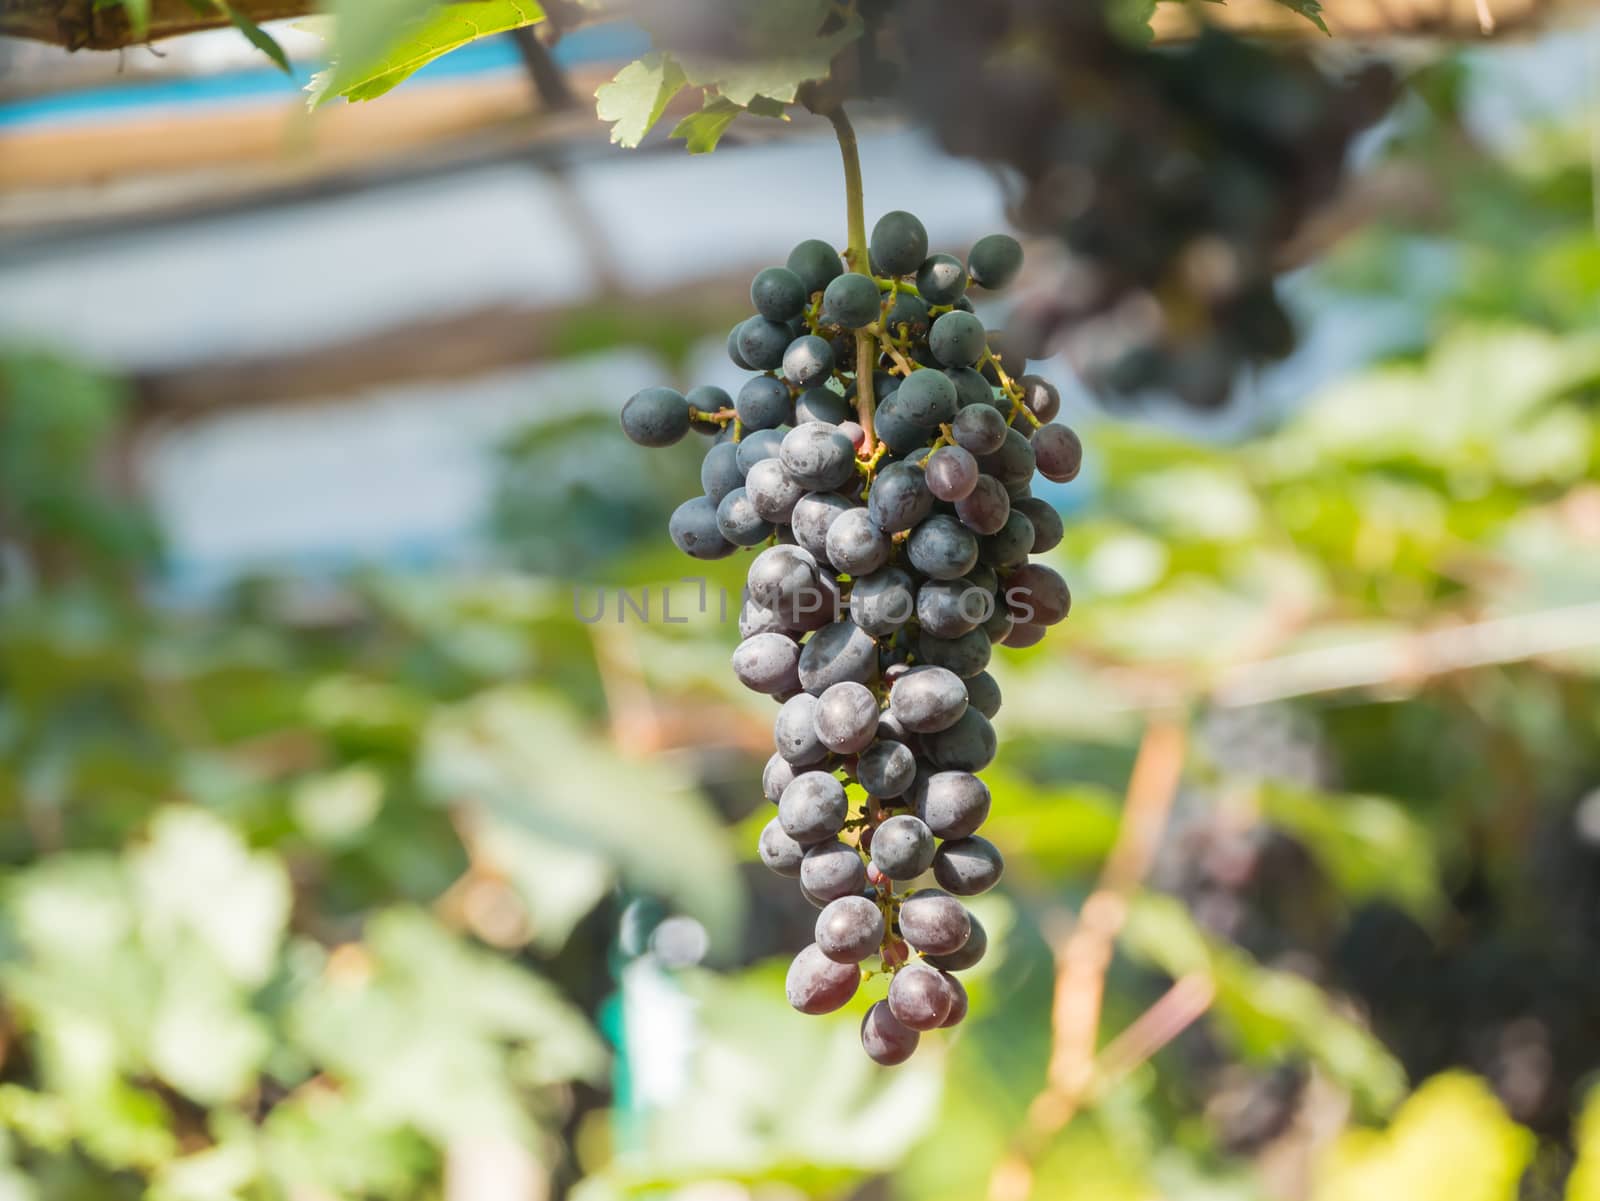 purple red grapes with green leaves on the vine. fresh fruits by nikky1972